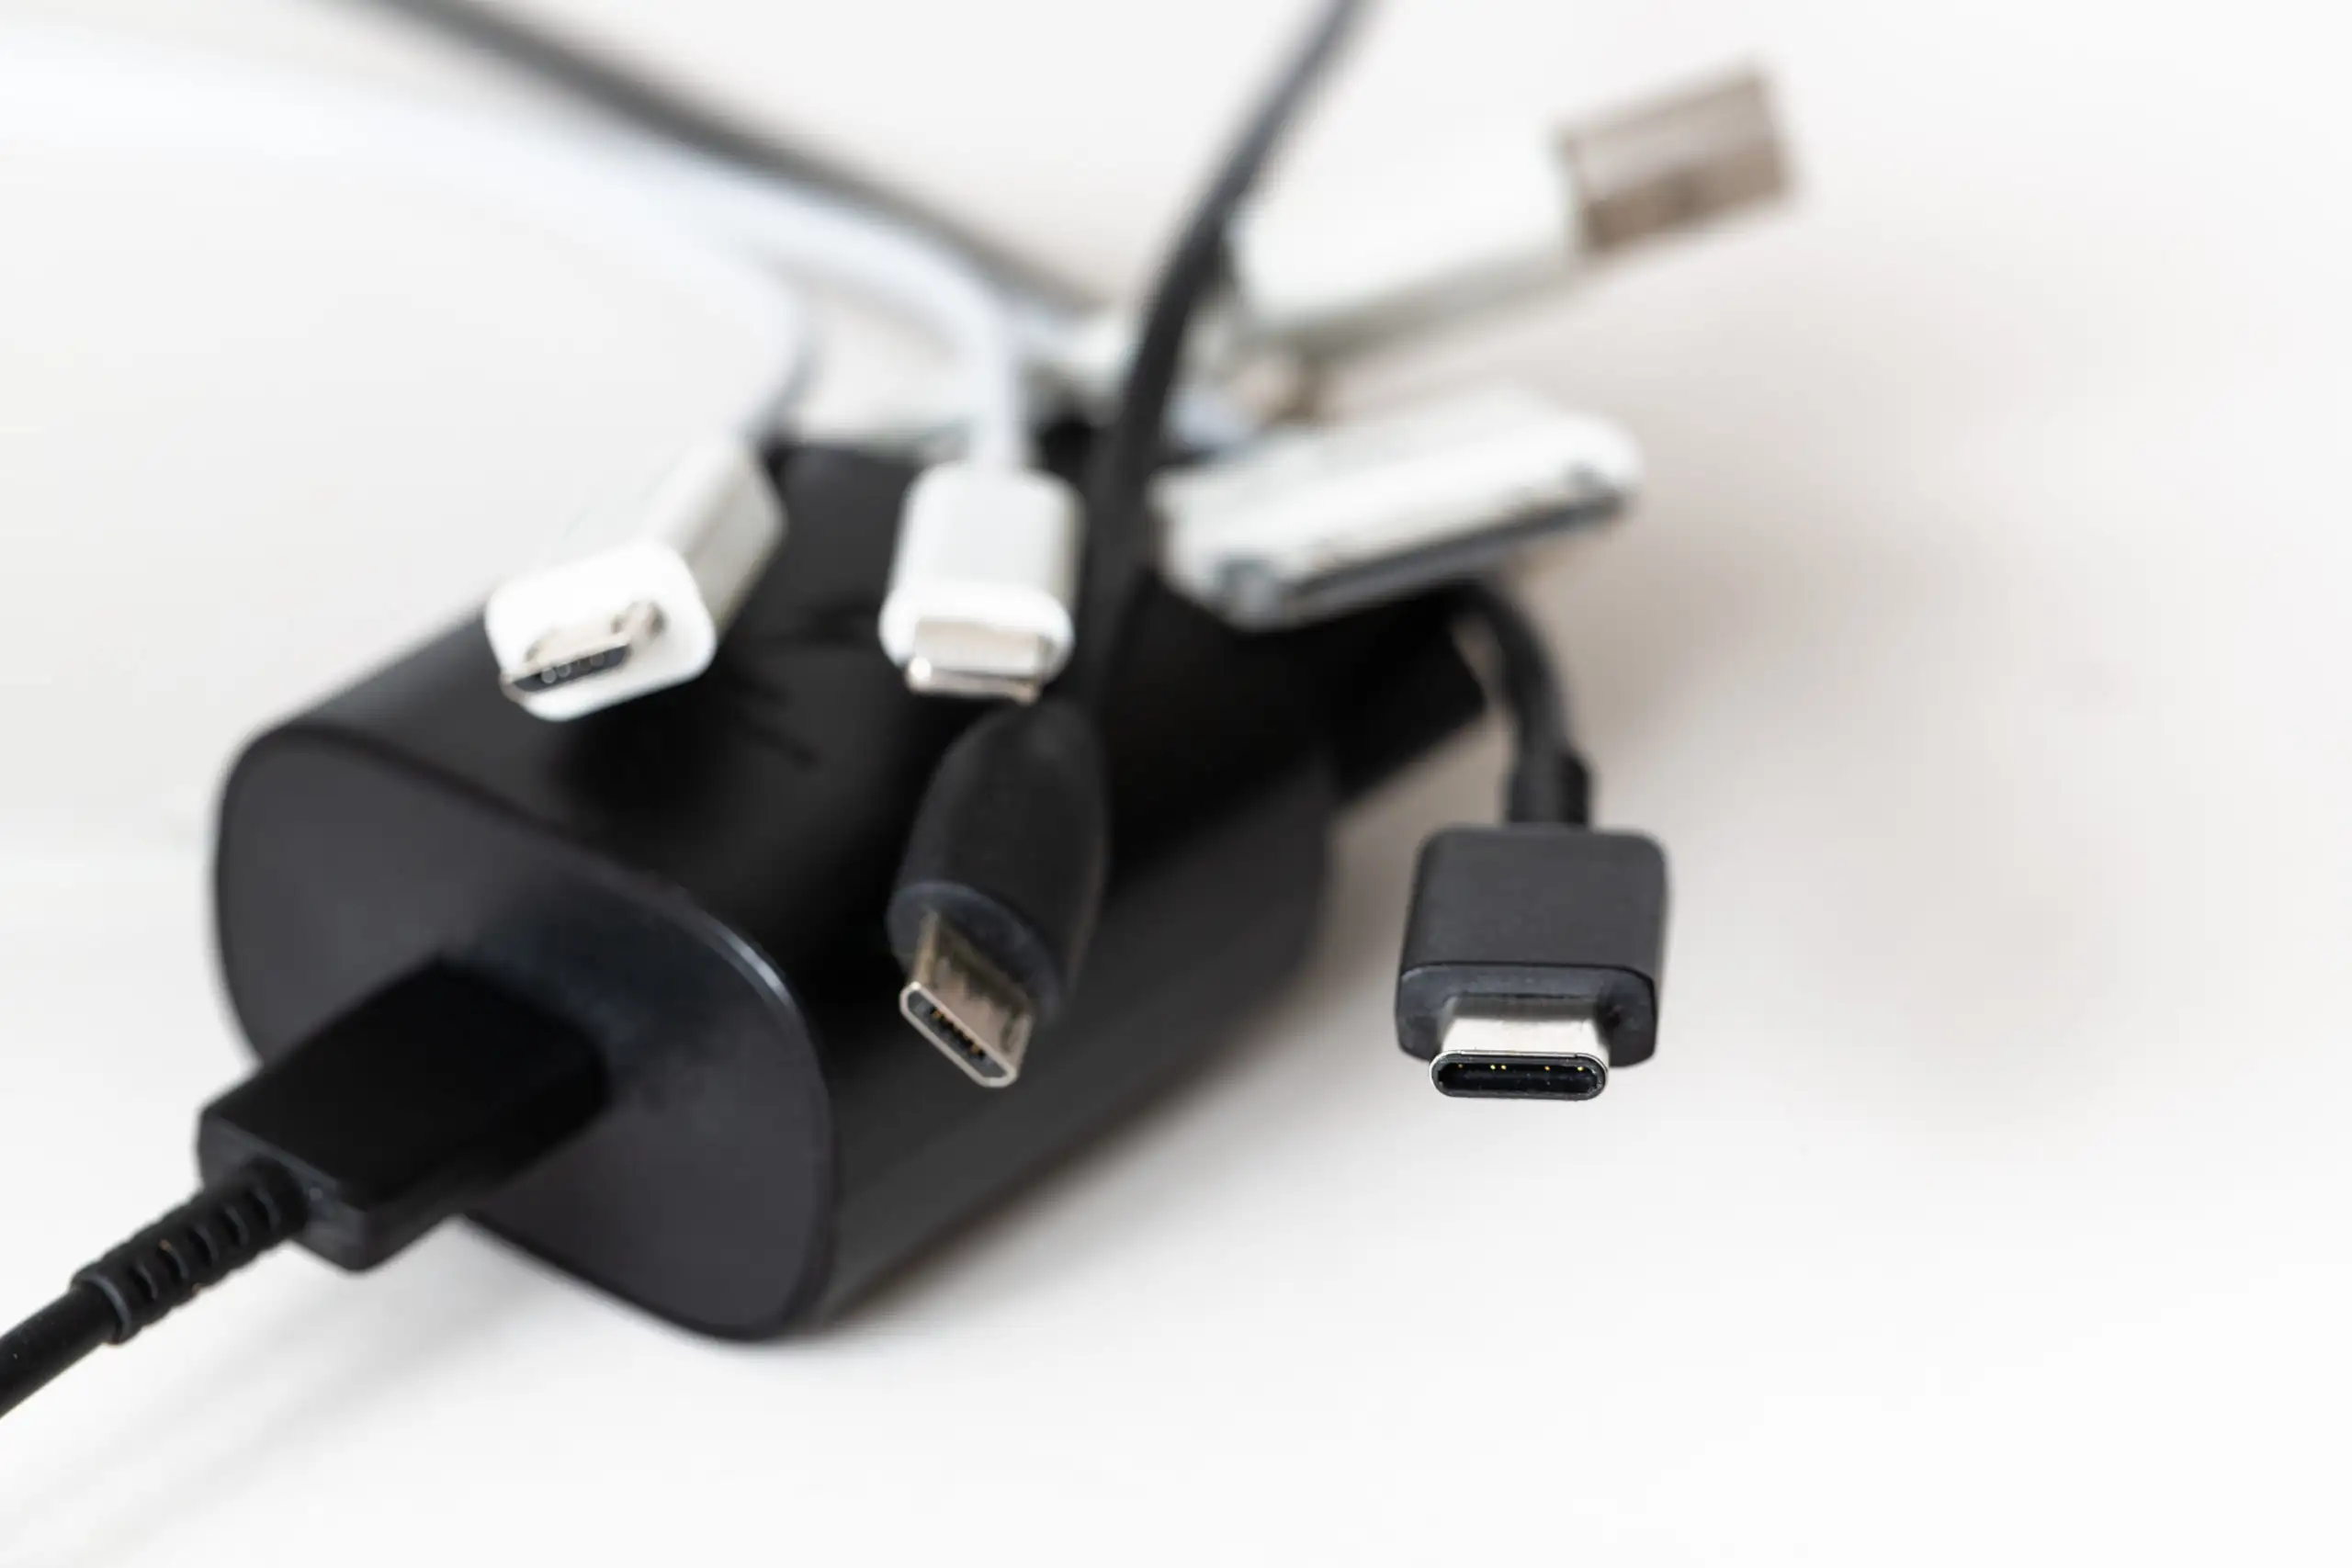 Will the US switch to USB-C?